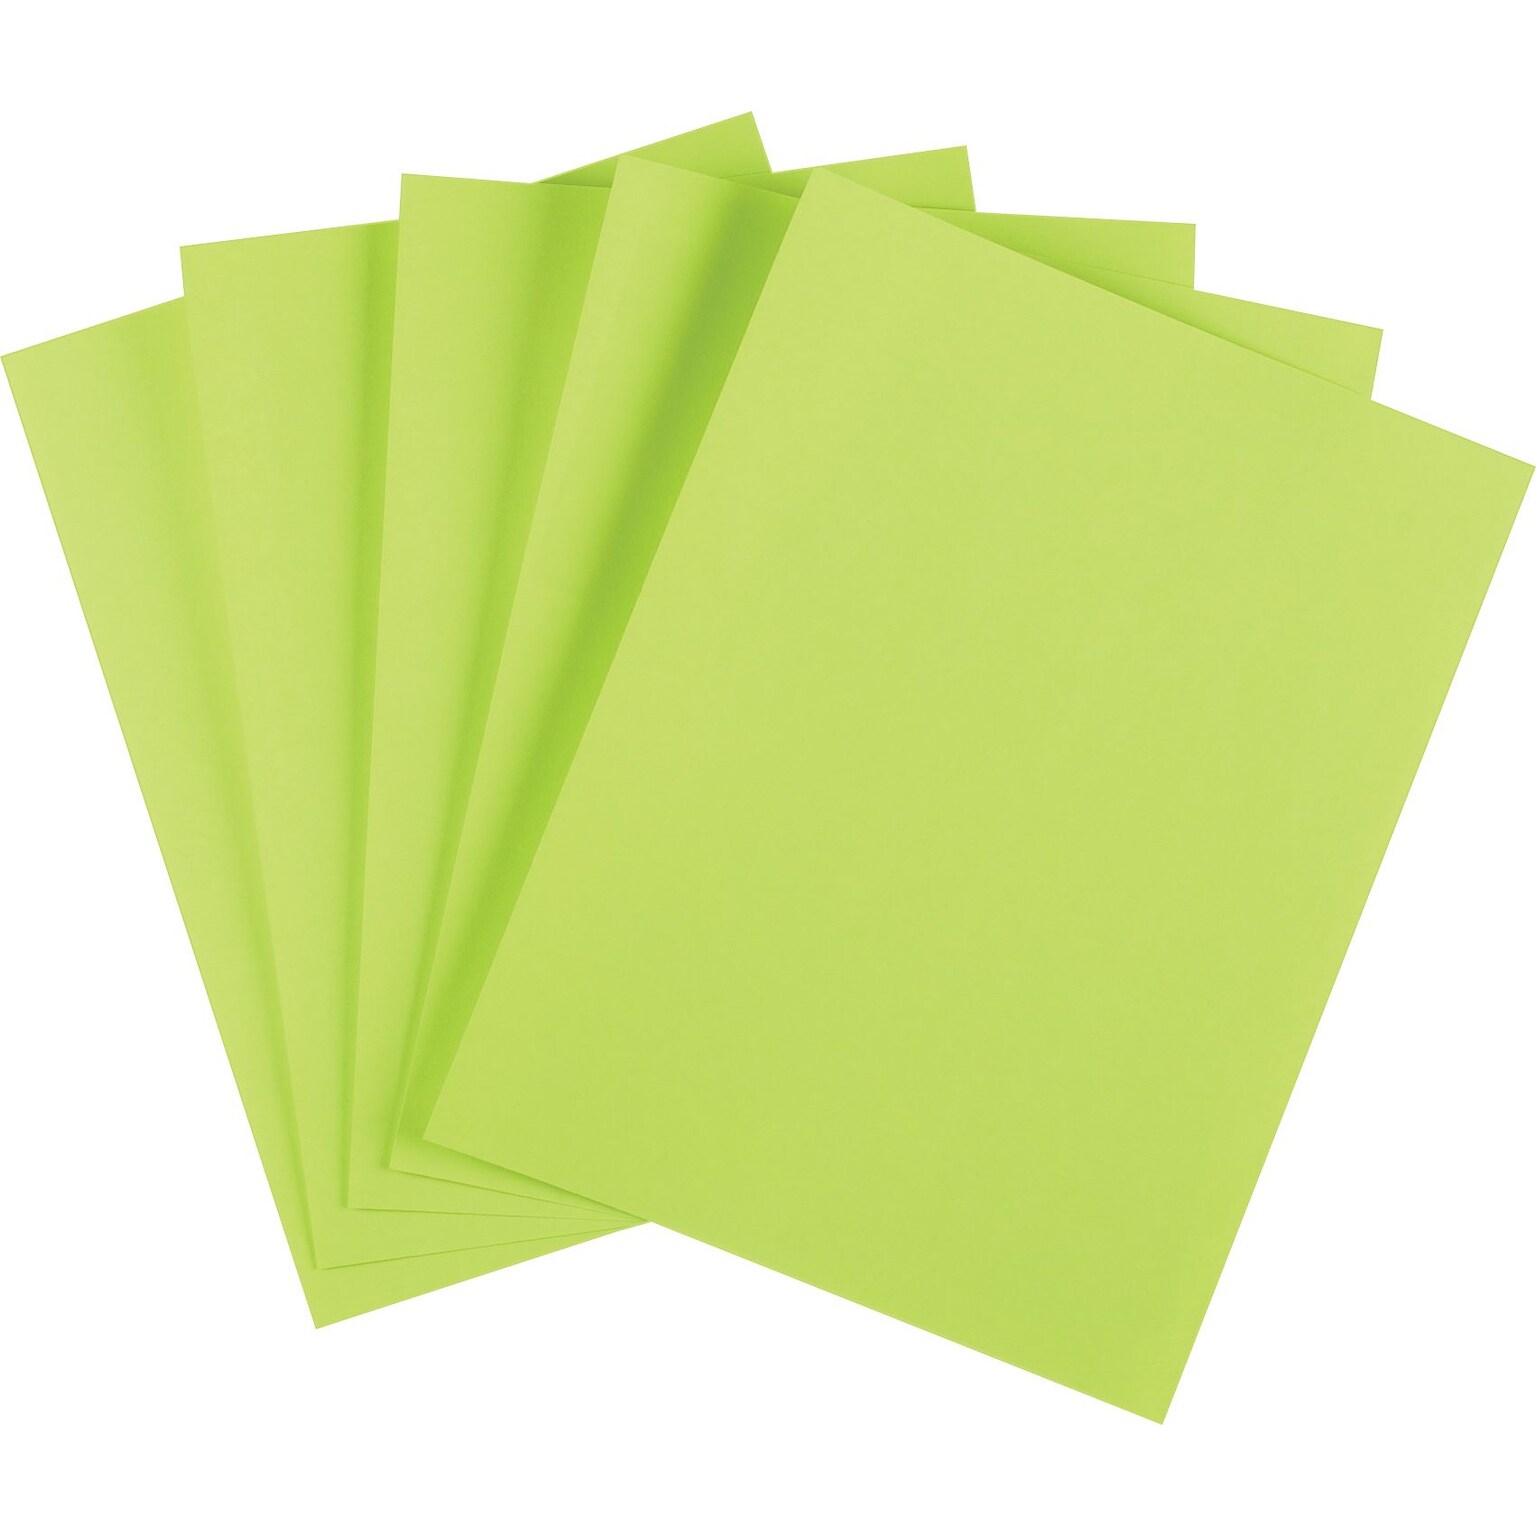 Staples® Brights Multipurpose Paper, 24 lbs., 8.5 x 11, Lime, 500/Ream (20105)